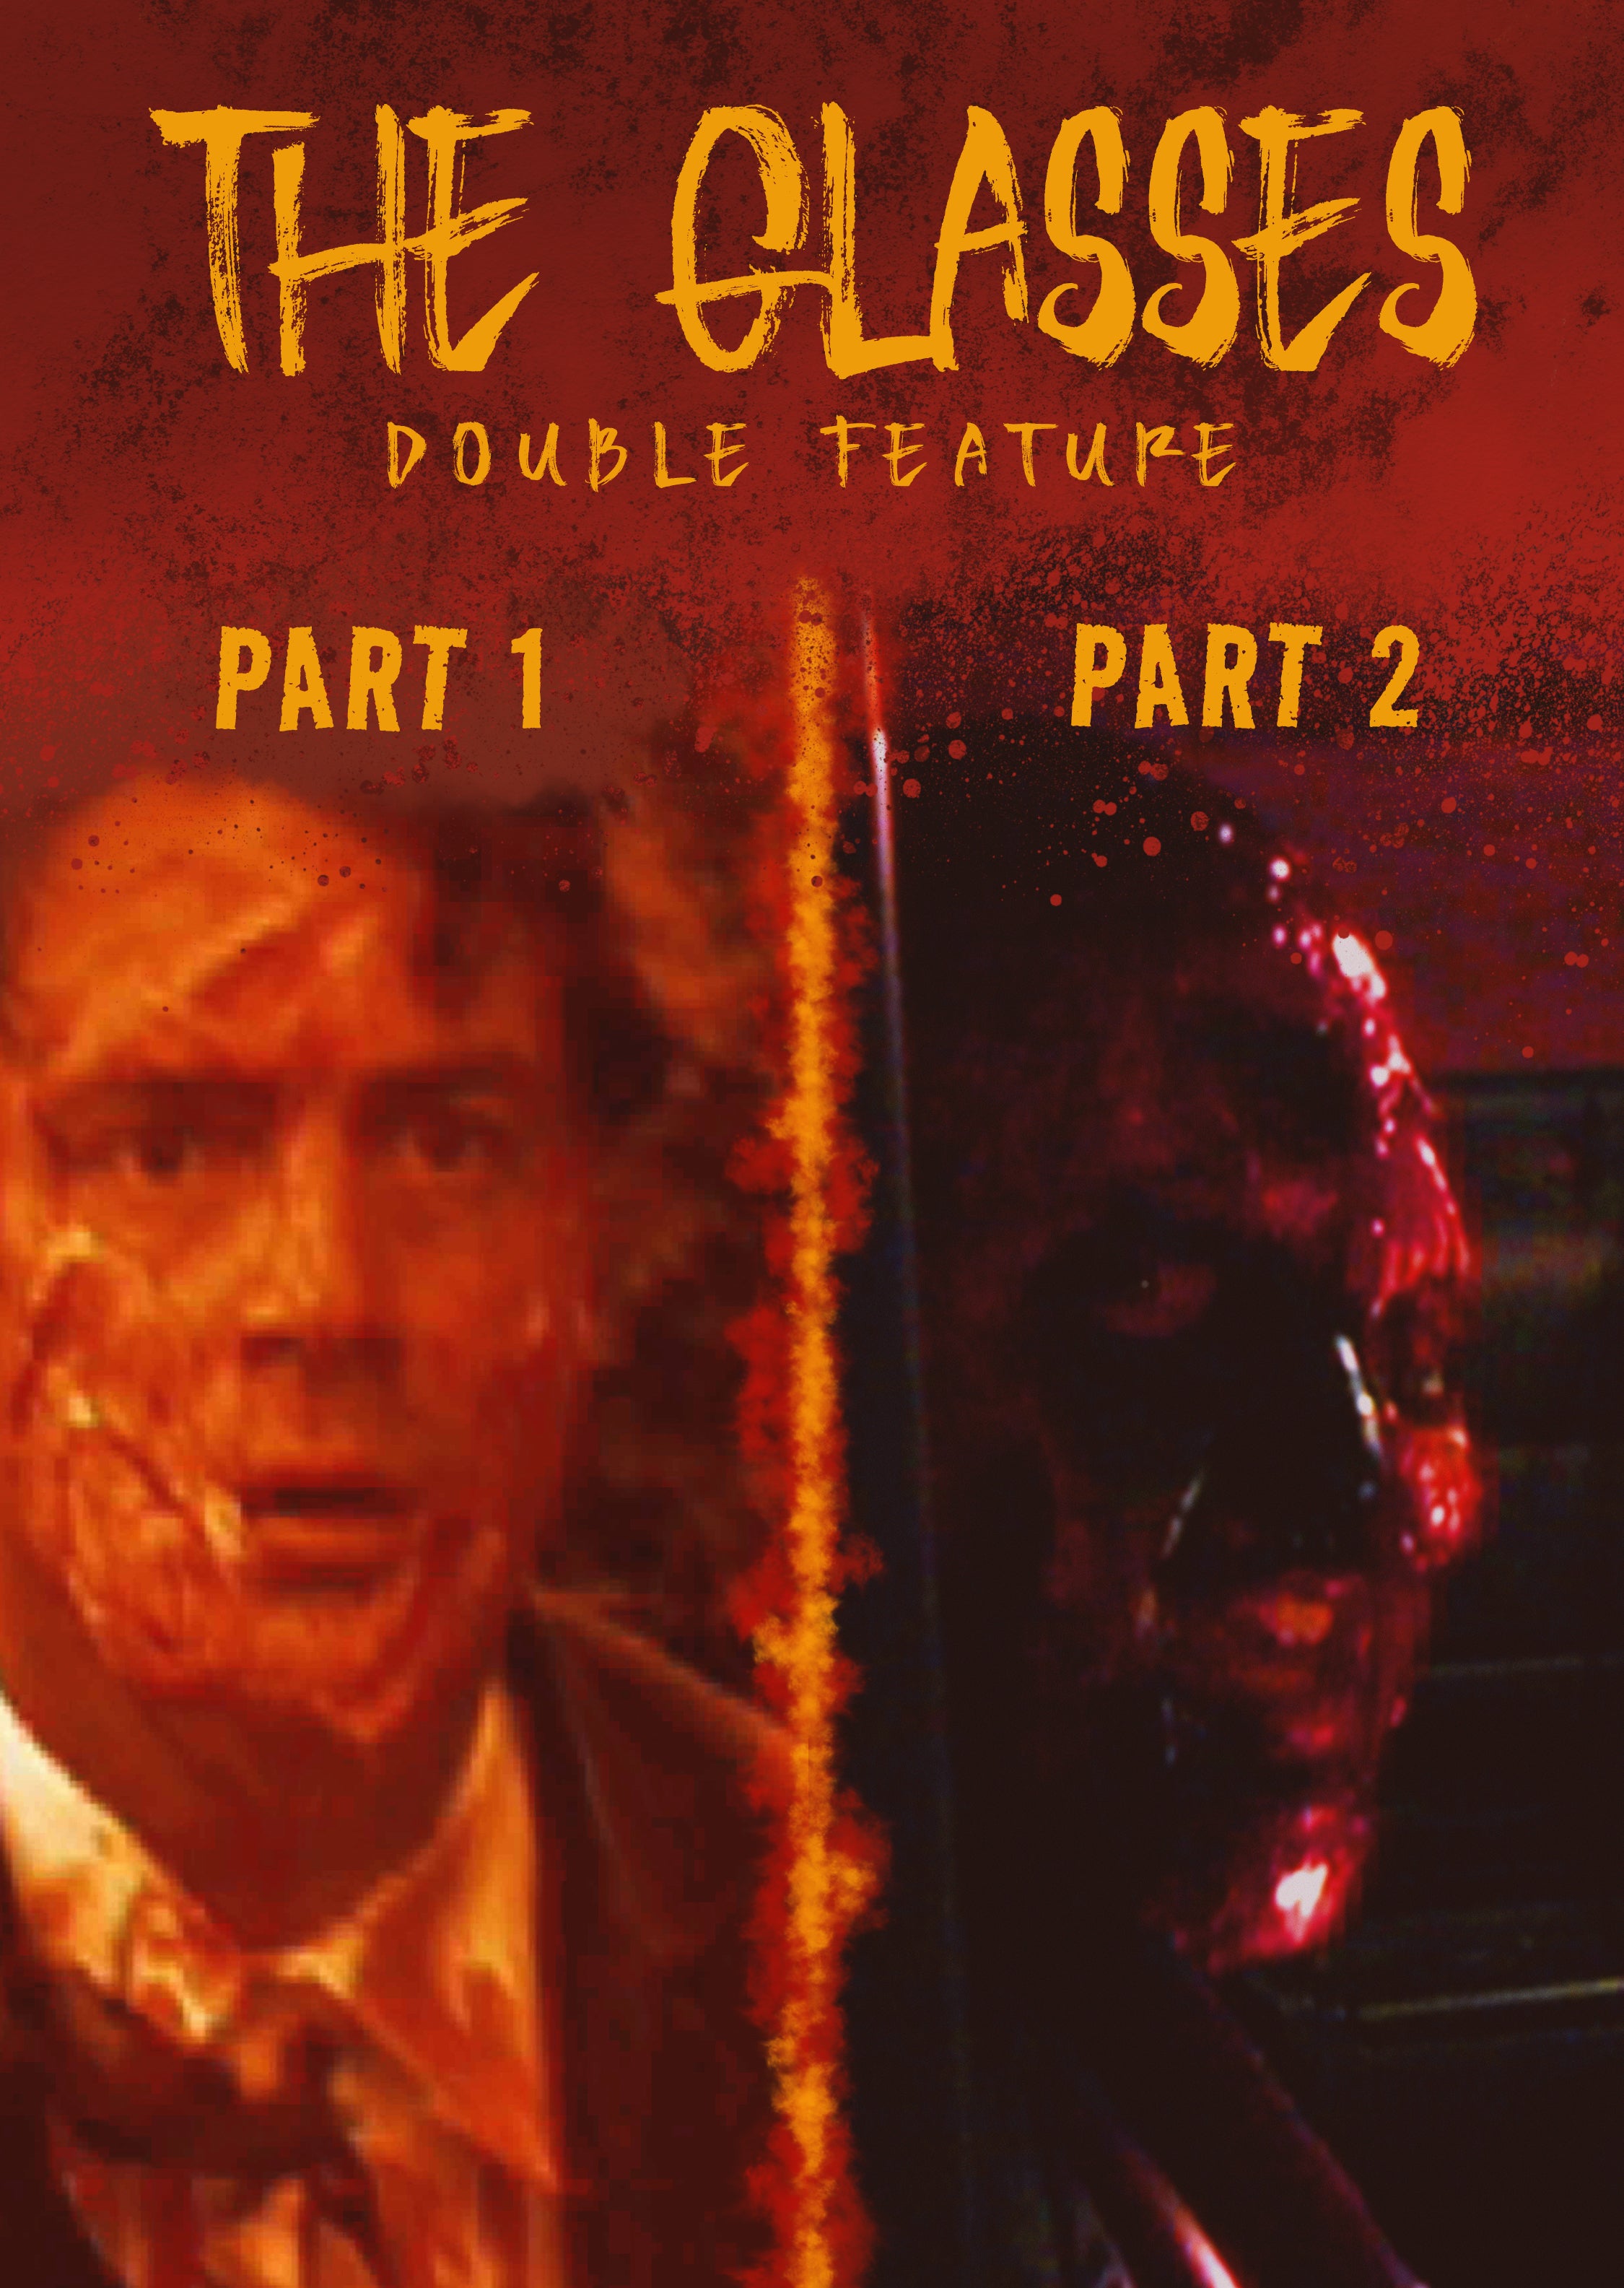 THE GLASSES DOUBLE FEATURE DVD